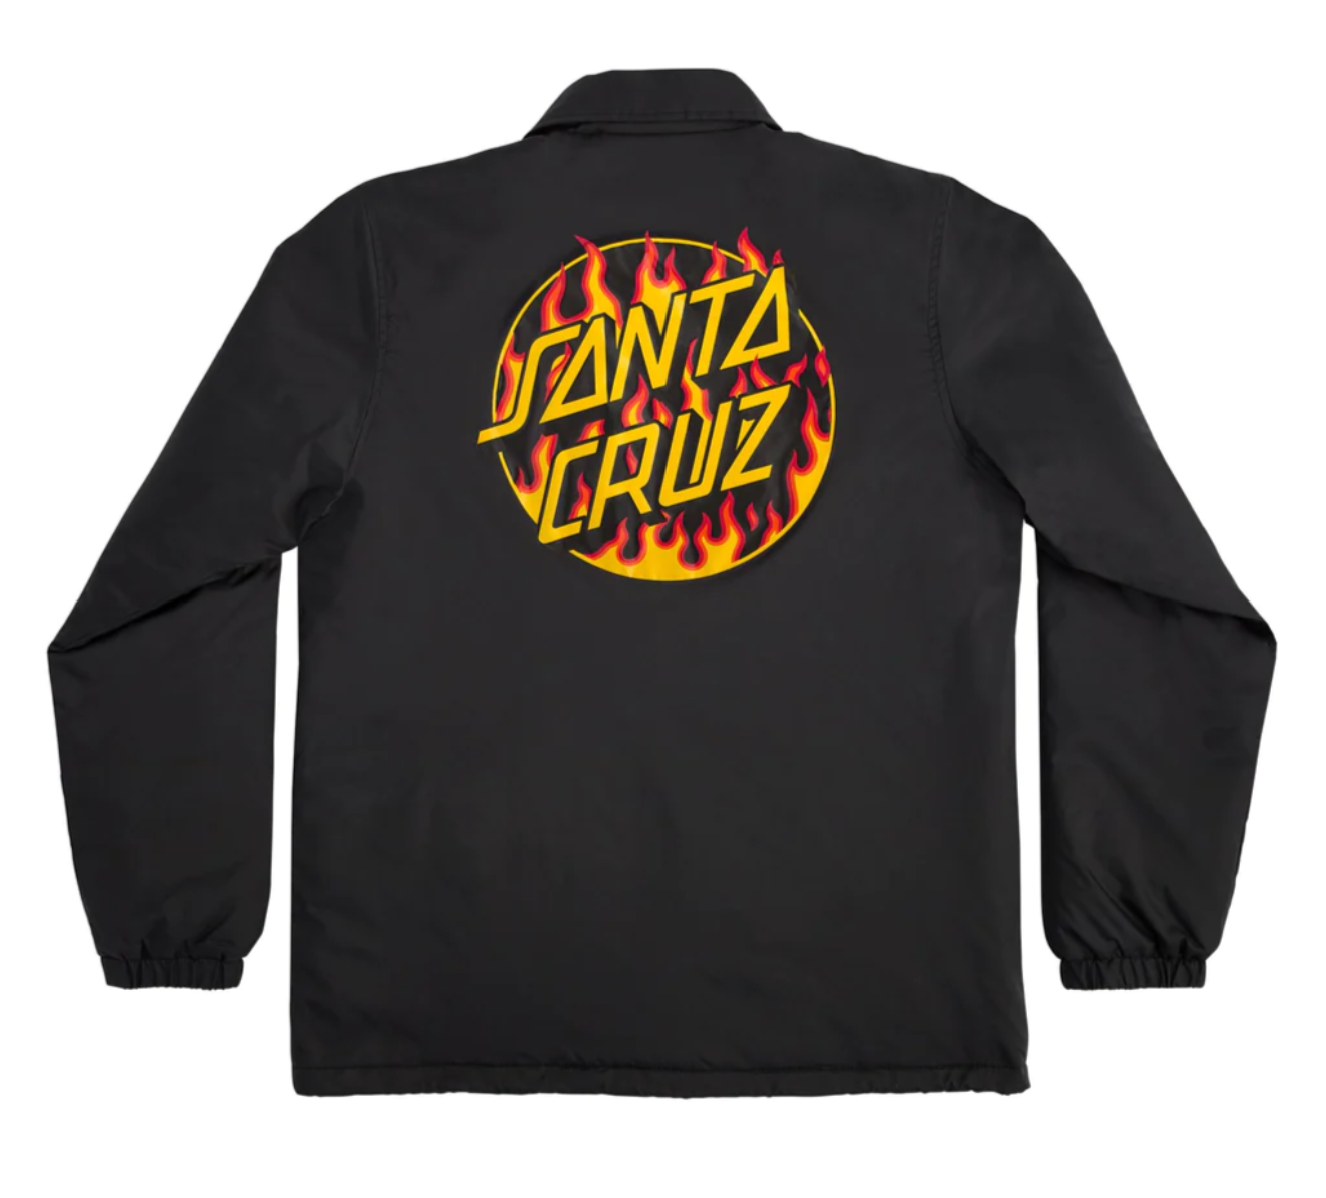 Thrasher links up with Santa Cruz Skateboards to drop one the most firing collaborations of the year. COTY? The new Thrasher Flame Dot men's custom, regular fit coach jacket features diamond quilted lining, custom Santa Cruz and Thrasher snaps, drawcord pulls at bottom opening and Santa Cruz x Thrasher Flame Dot logo screen prints at front and back. Skate and destroy till the end.